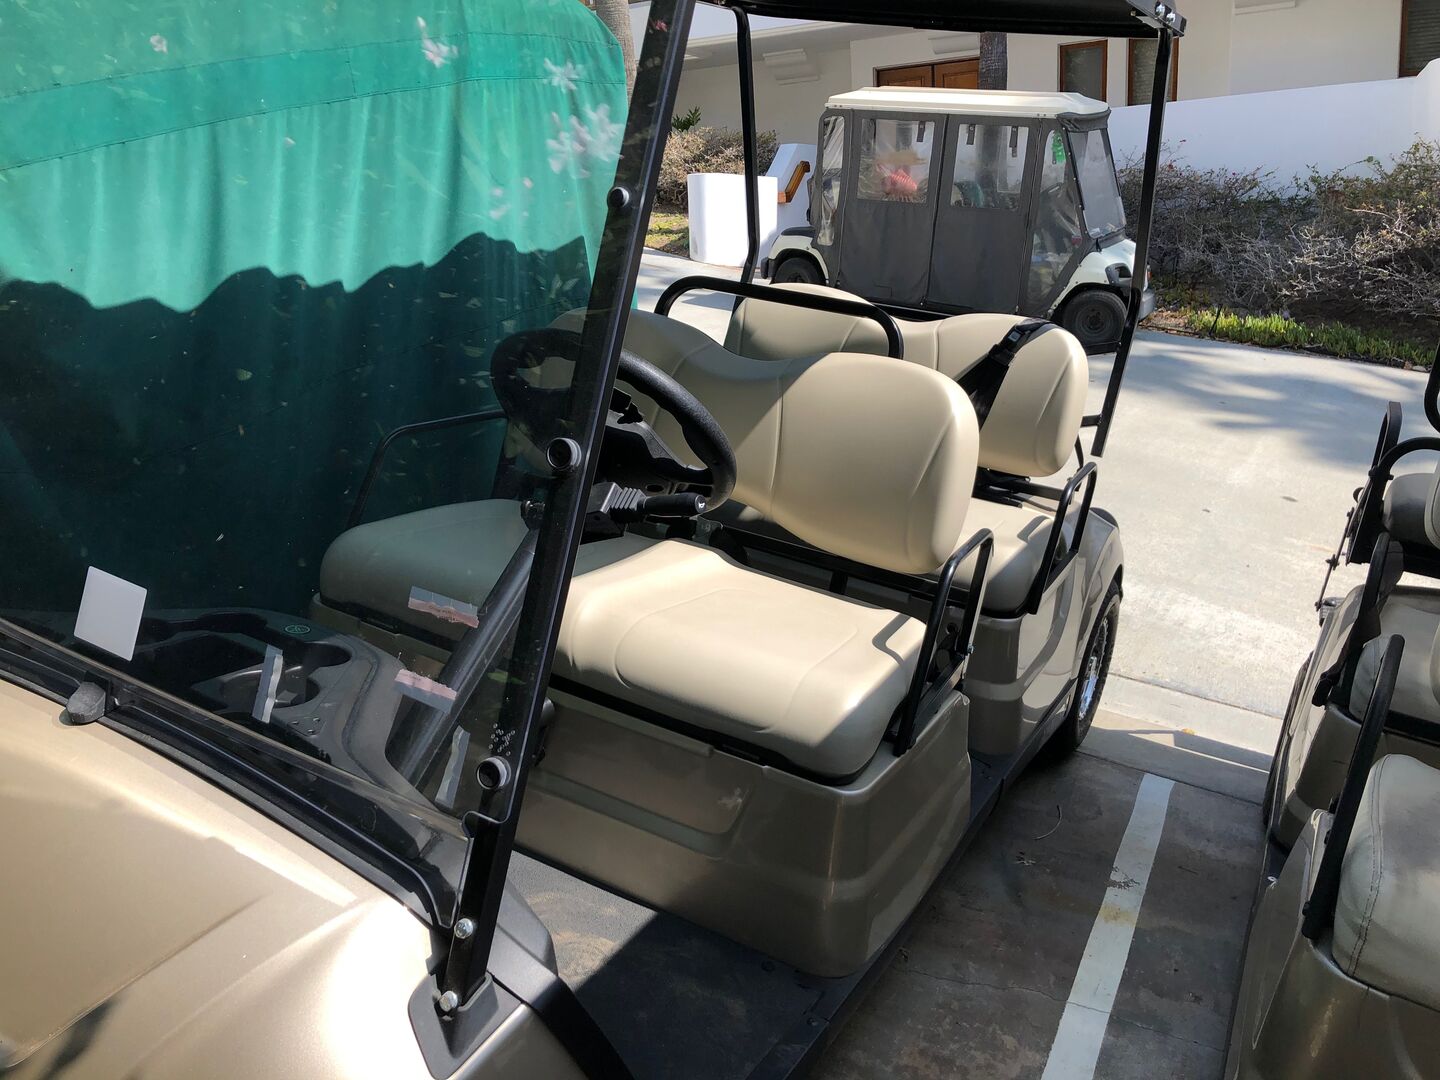 We provide a golf cart for your stay to explore Avalon